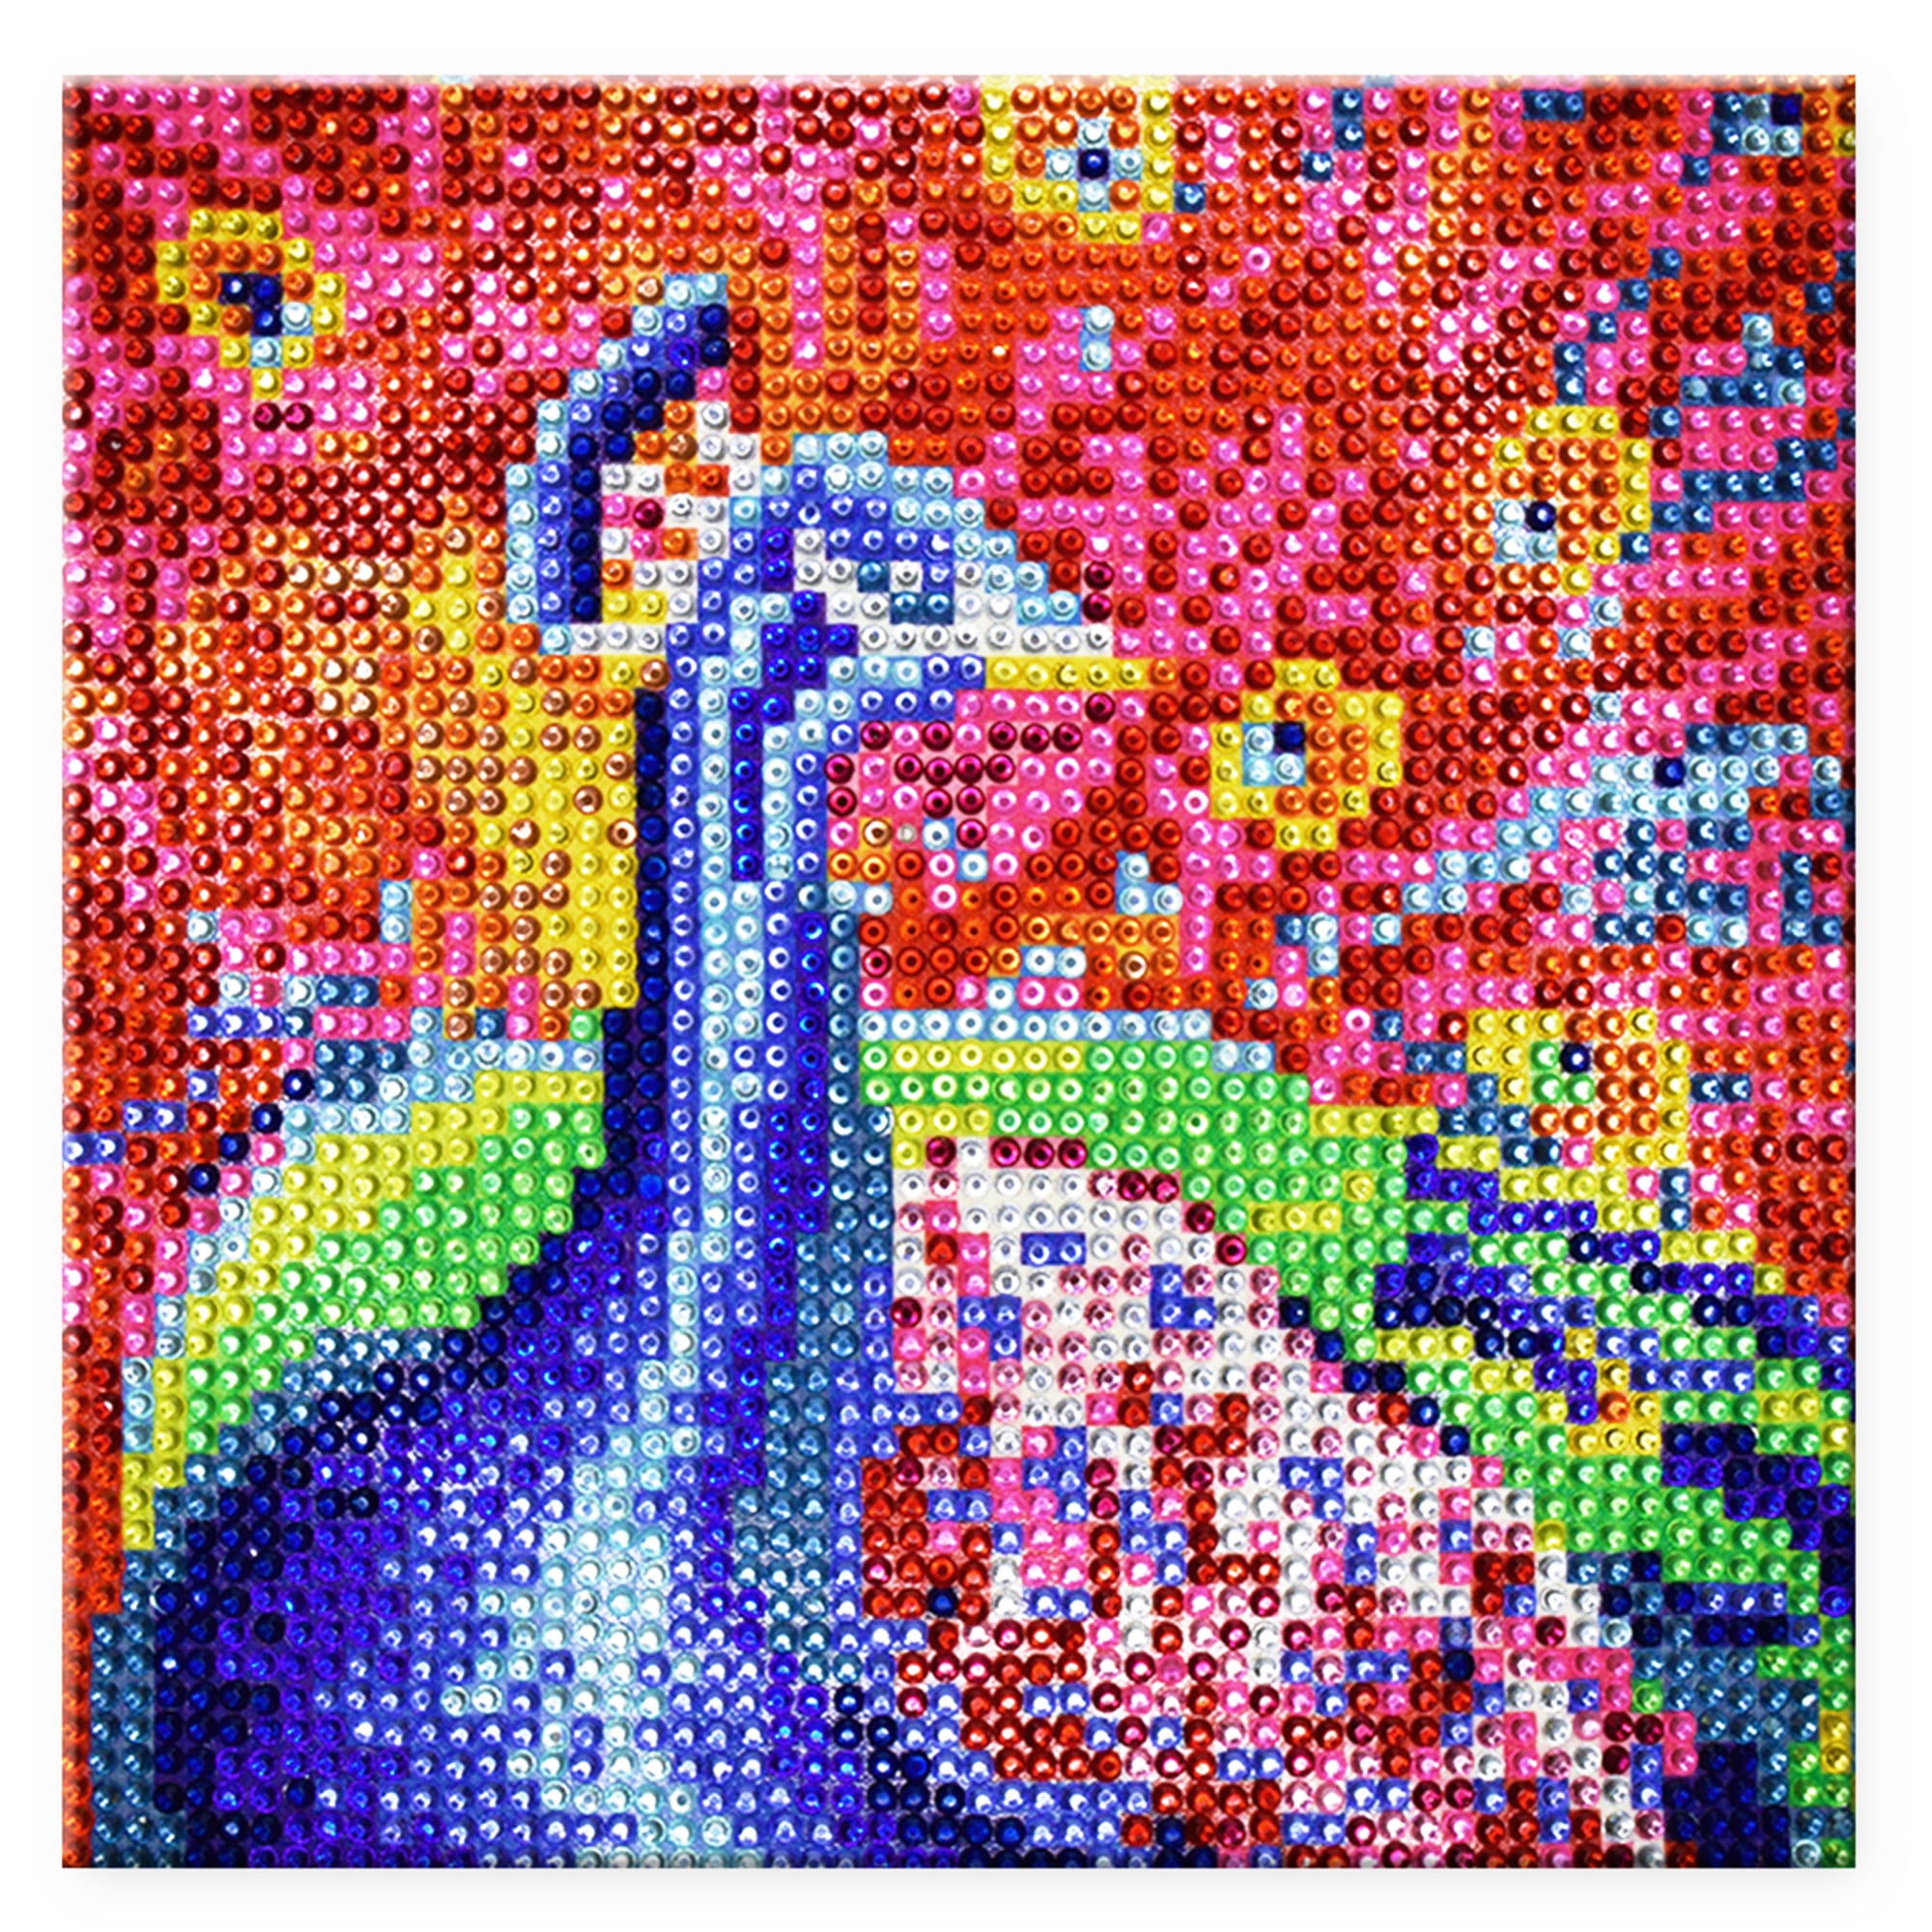 PEACOCK DIAMOND Painting!! - USA!! - 6x6 - CRYSTALS Paint Number